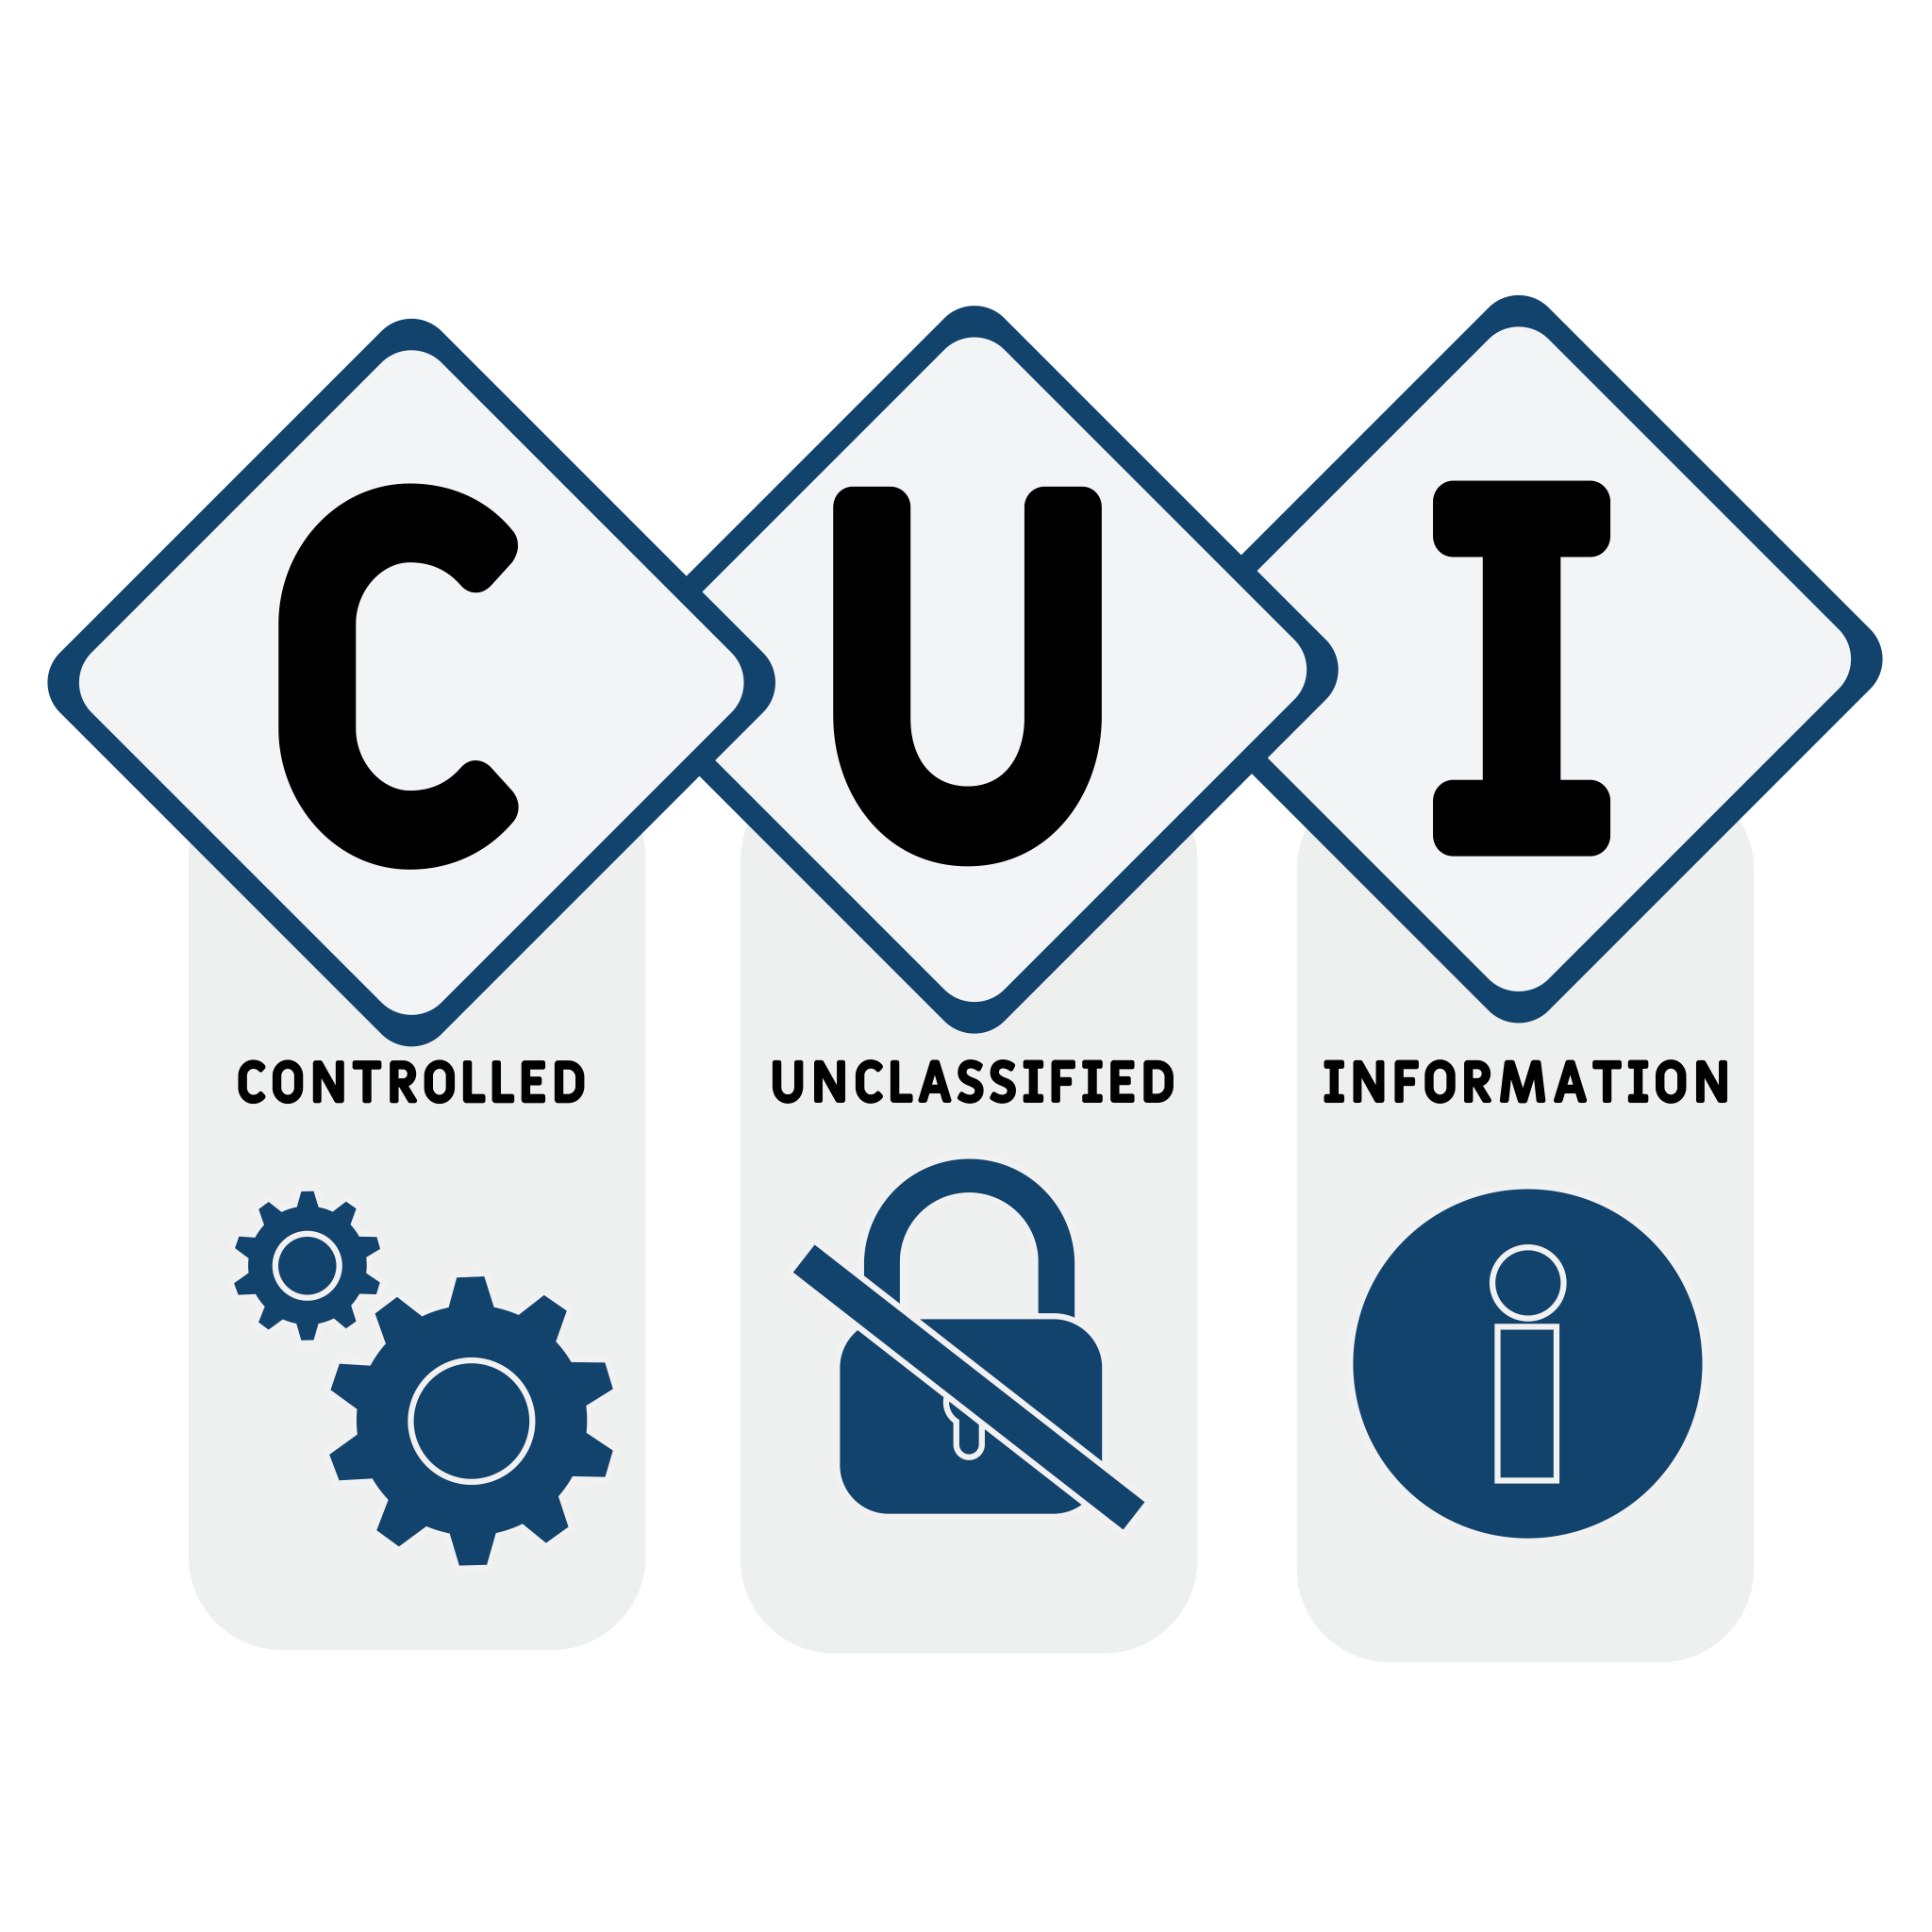 CUI (Controlled Unclassified Information) with image of gears, unlocked padlock, and information icon.